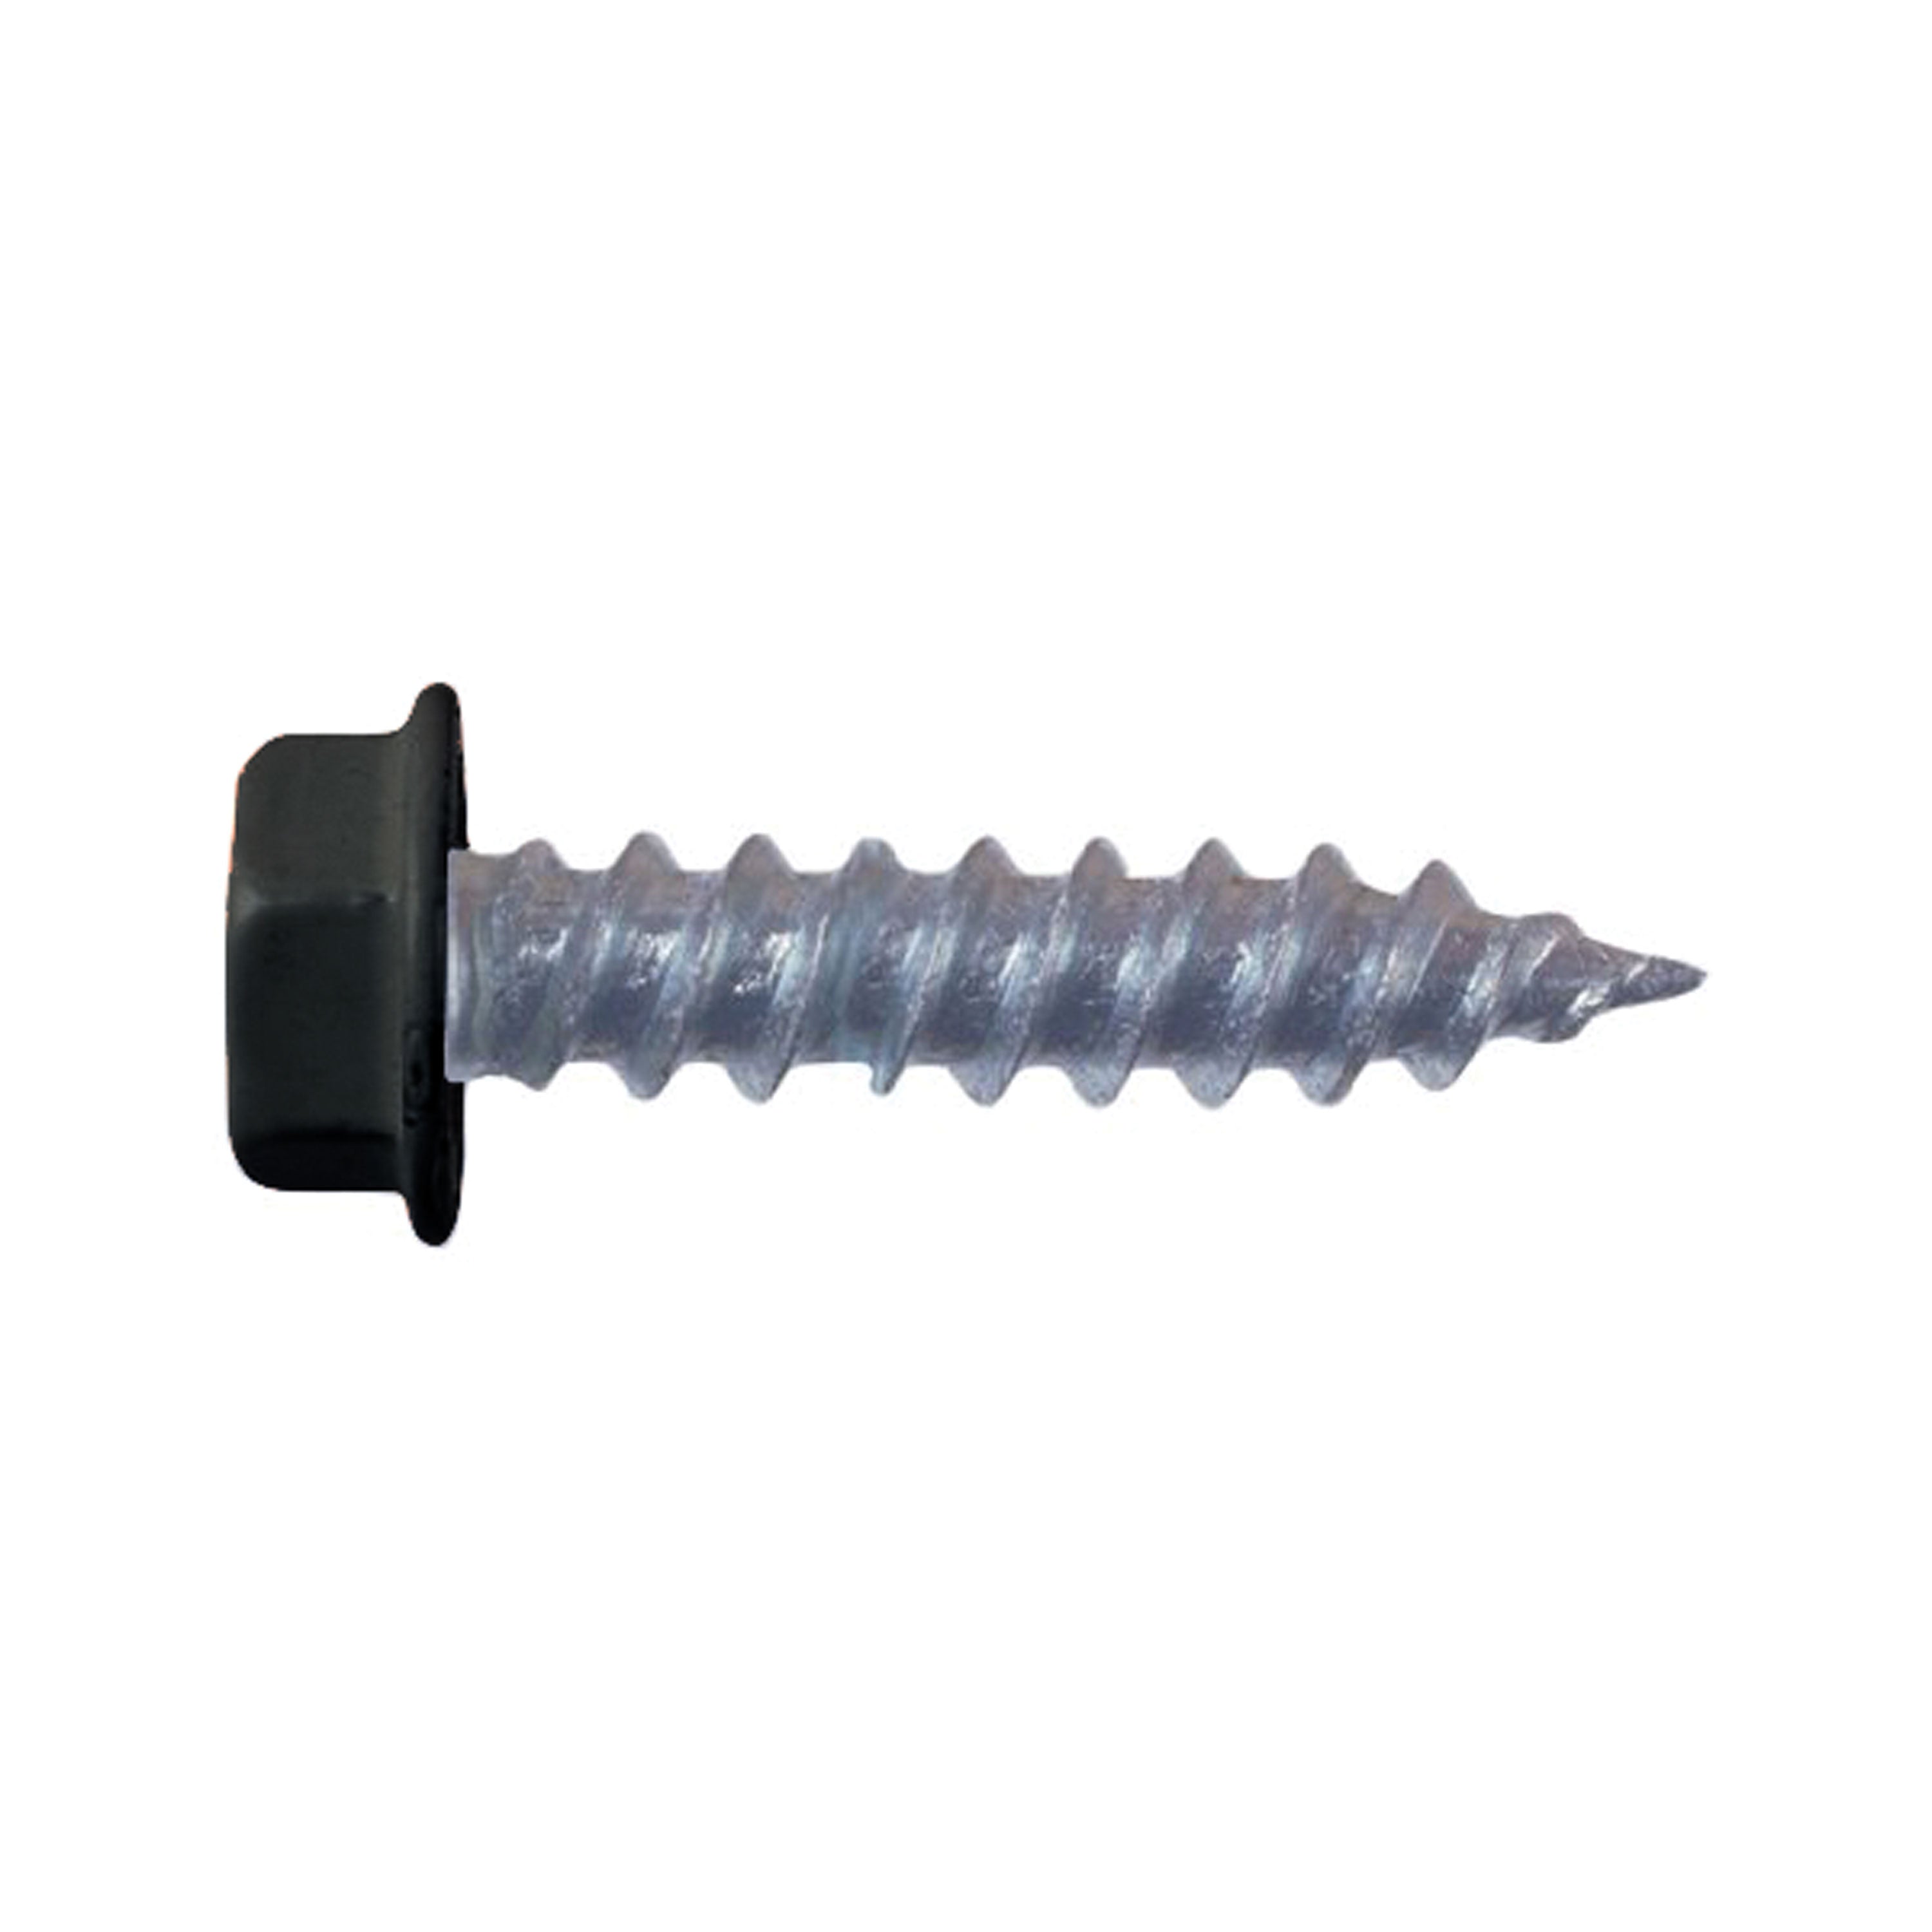 AP Products 012-TR50 BL 8 X 1-1/2 Black #8 Hex Washer Head Screw, 1-1/2" / Pack of 50